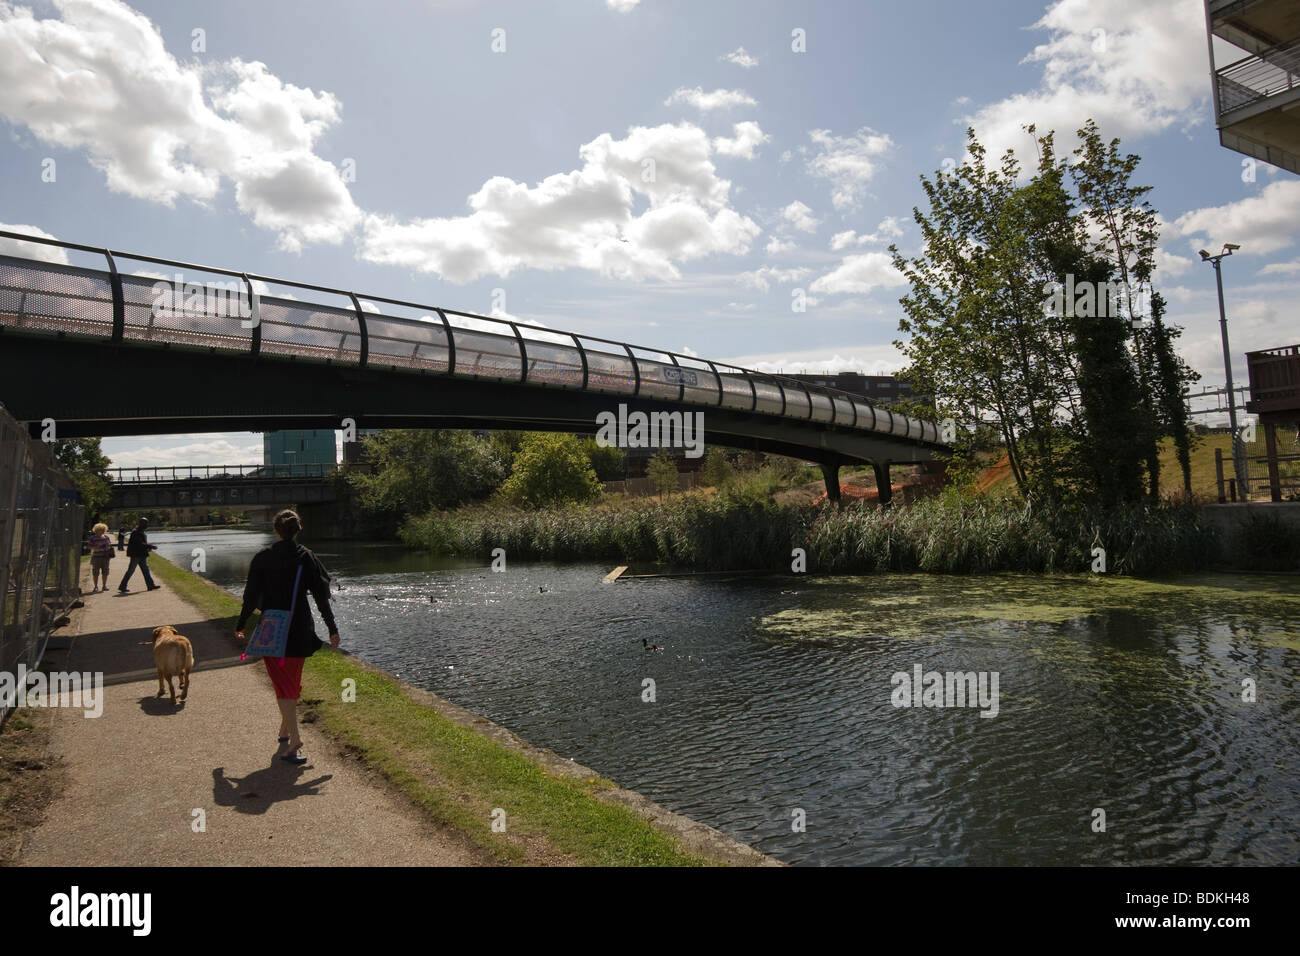 New Meath Bridge over Regents Canal 'Mile End Park' ' London Borough of Tower Hamlets' Tower Hamlets London GB UK green space Stock Photo